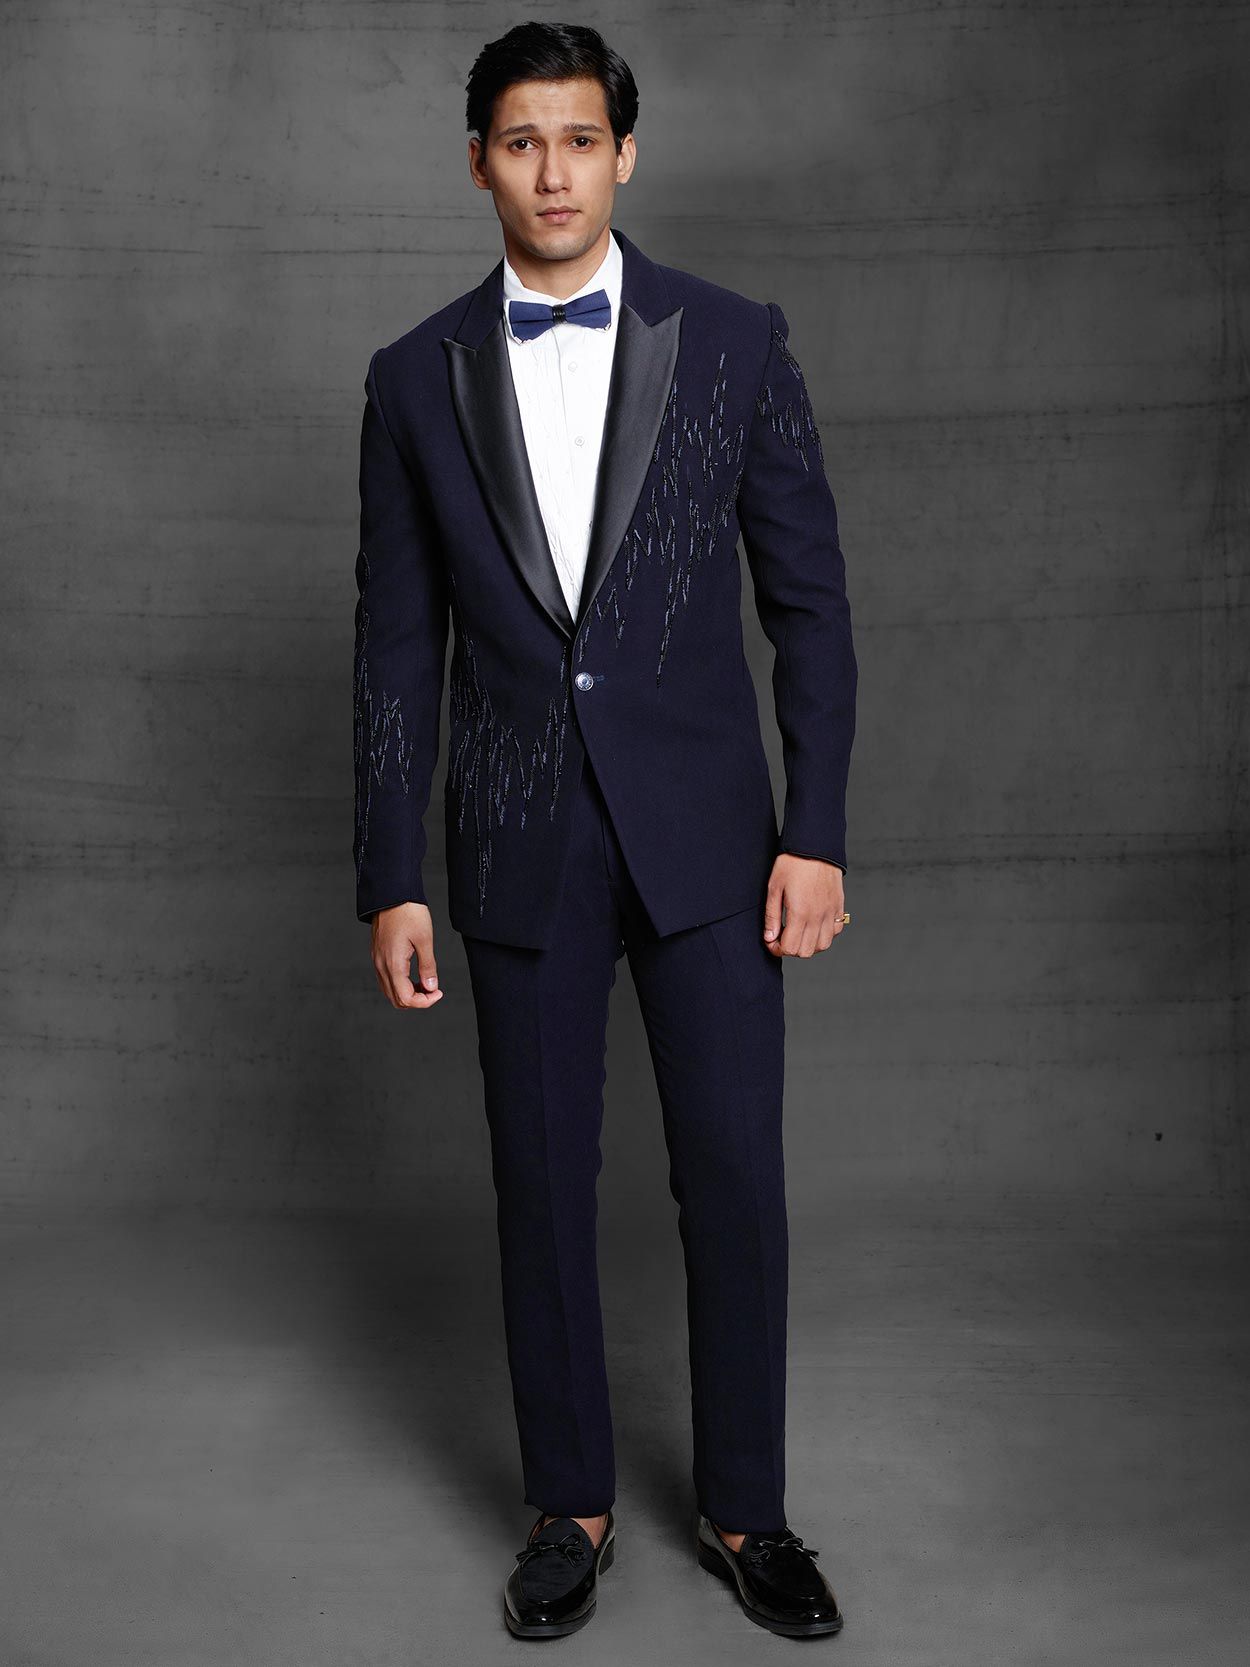 Say 'I Do' to Bridal Party Blue Suits: Get the Best Deals Now!